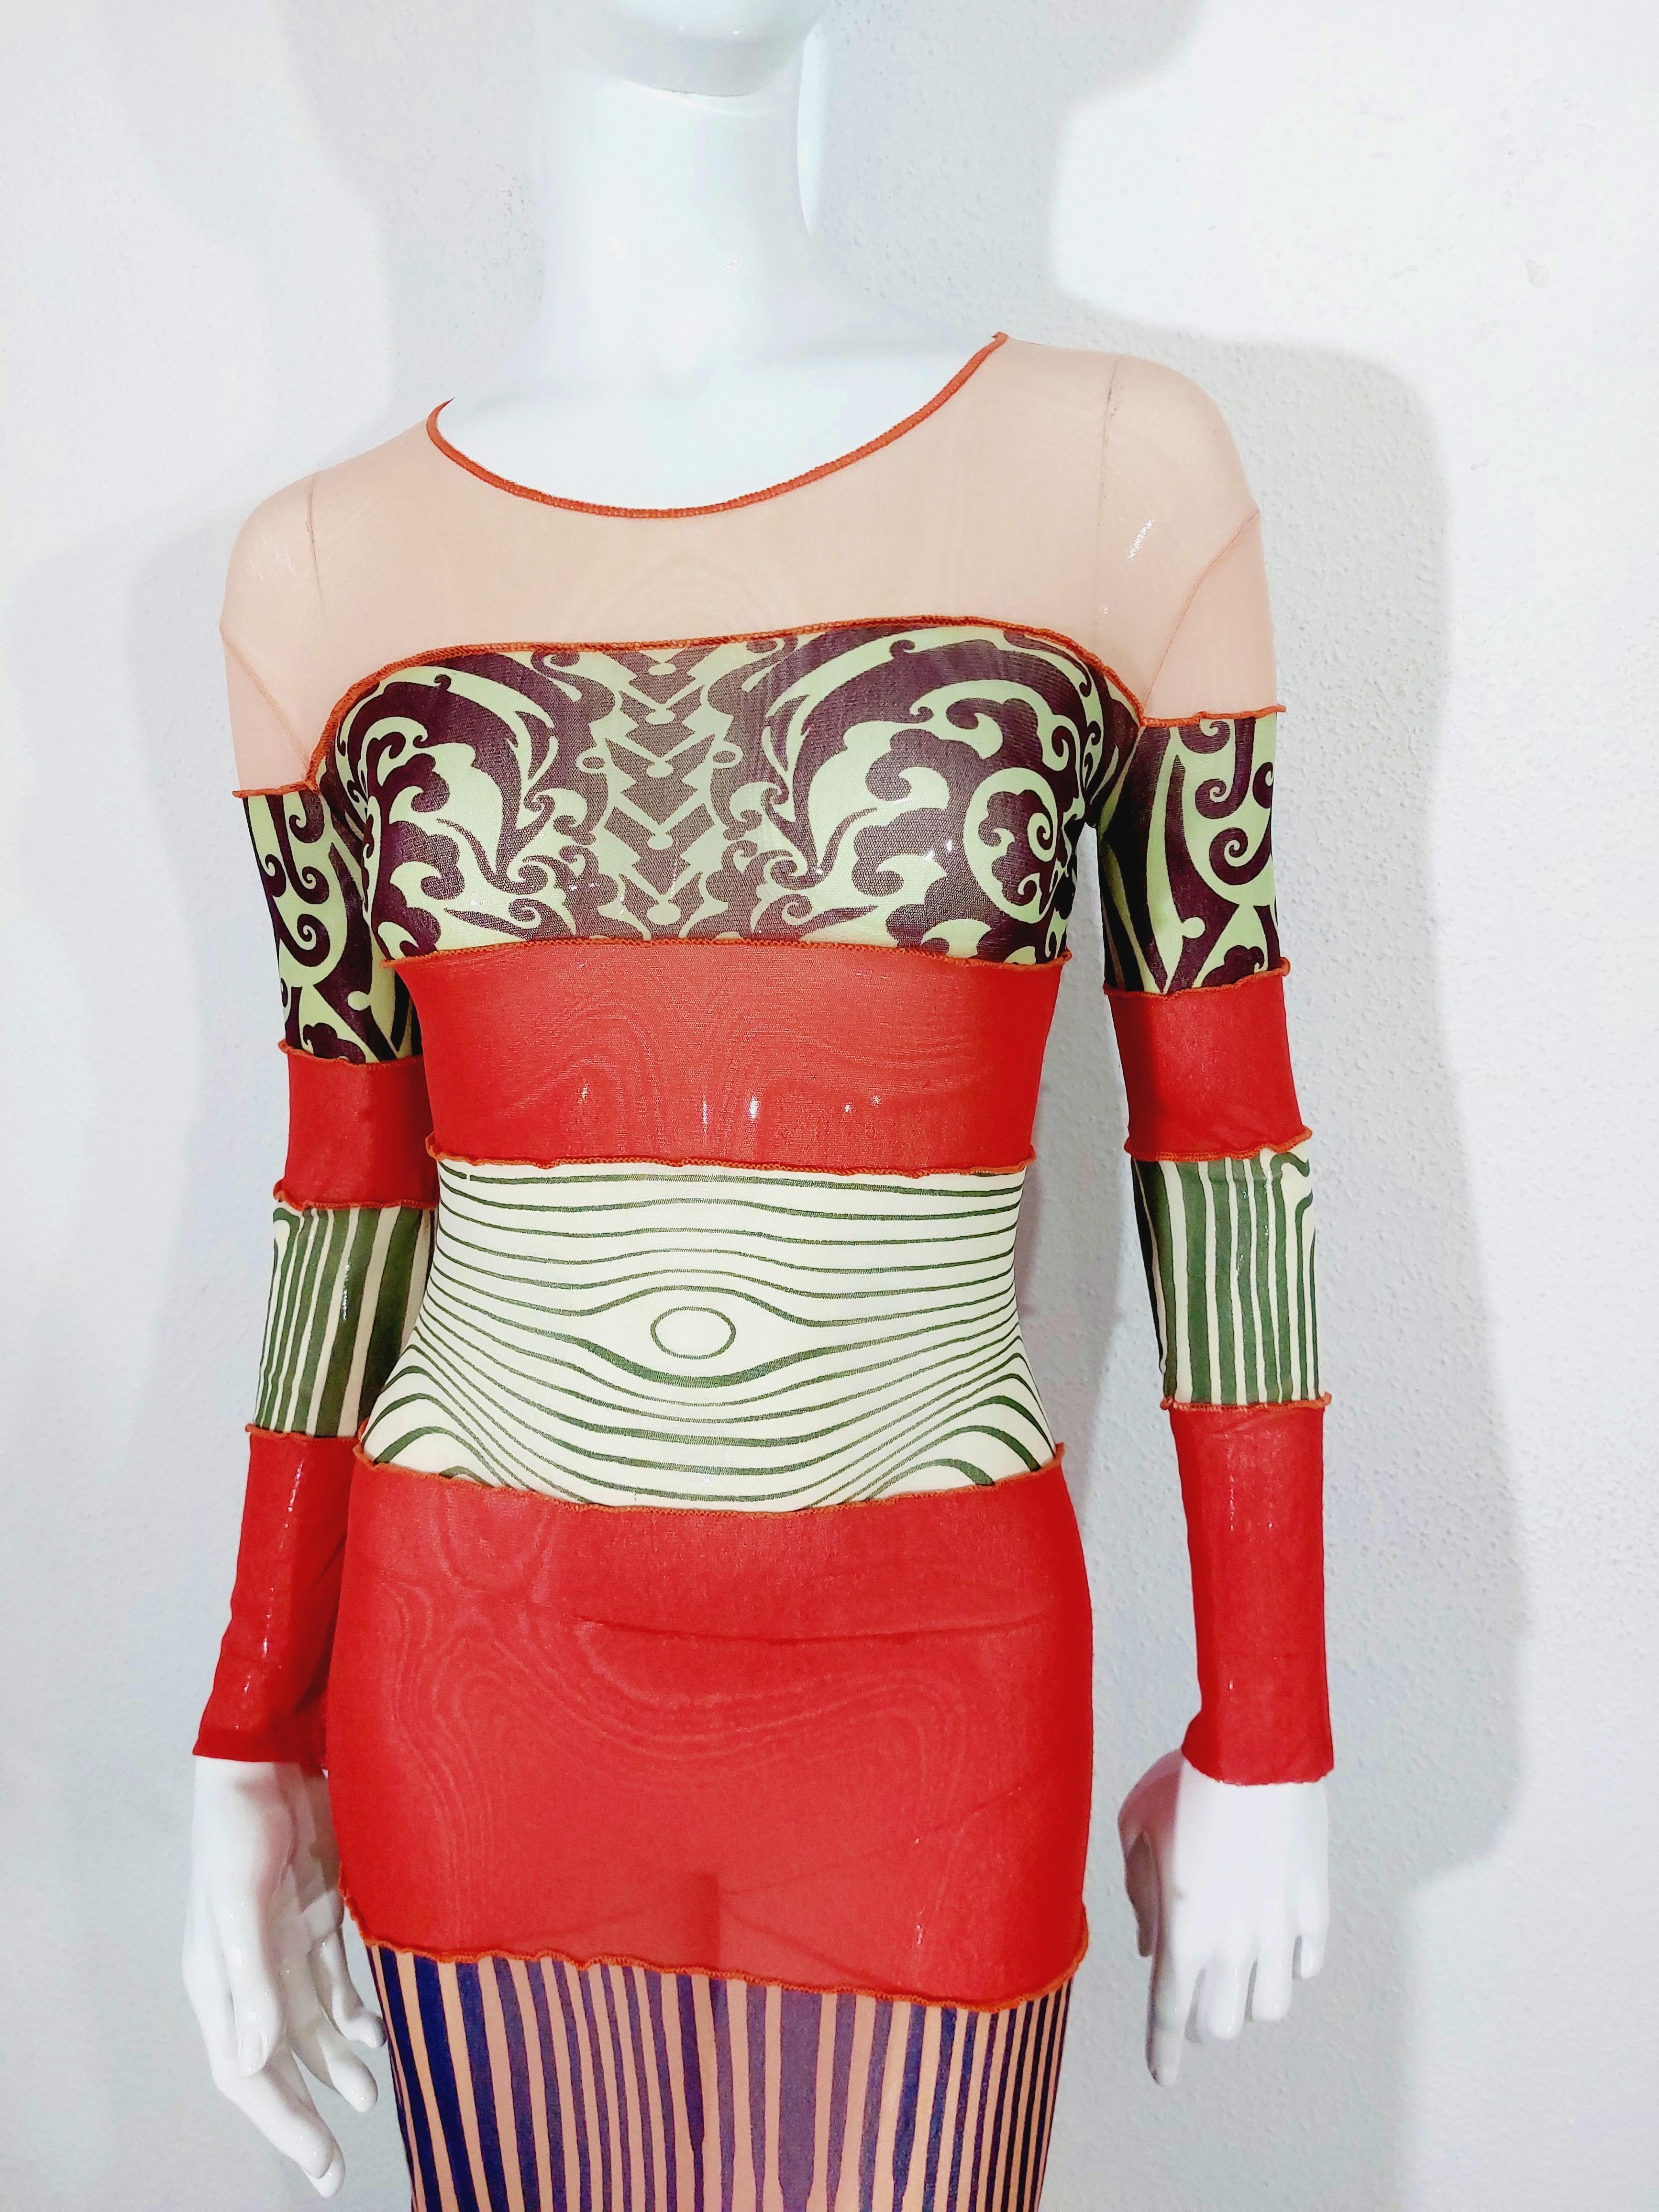 Jean Paul Gaultier Optical Illusion Nude Ethic Trompe l'oeil Vanessa Guide Dress In Good Condition For Sale In PARIS, FR